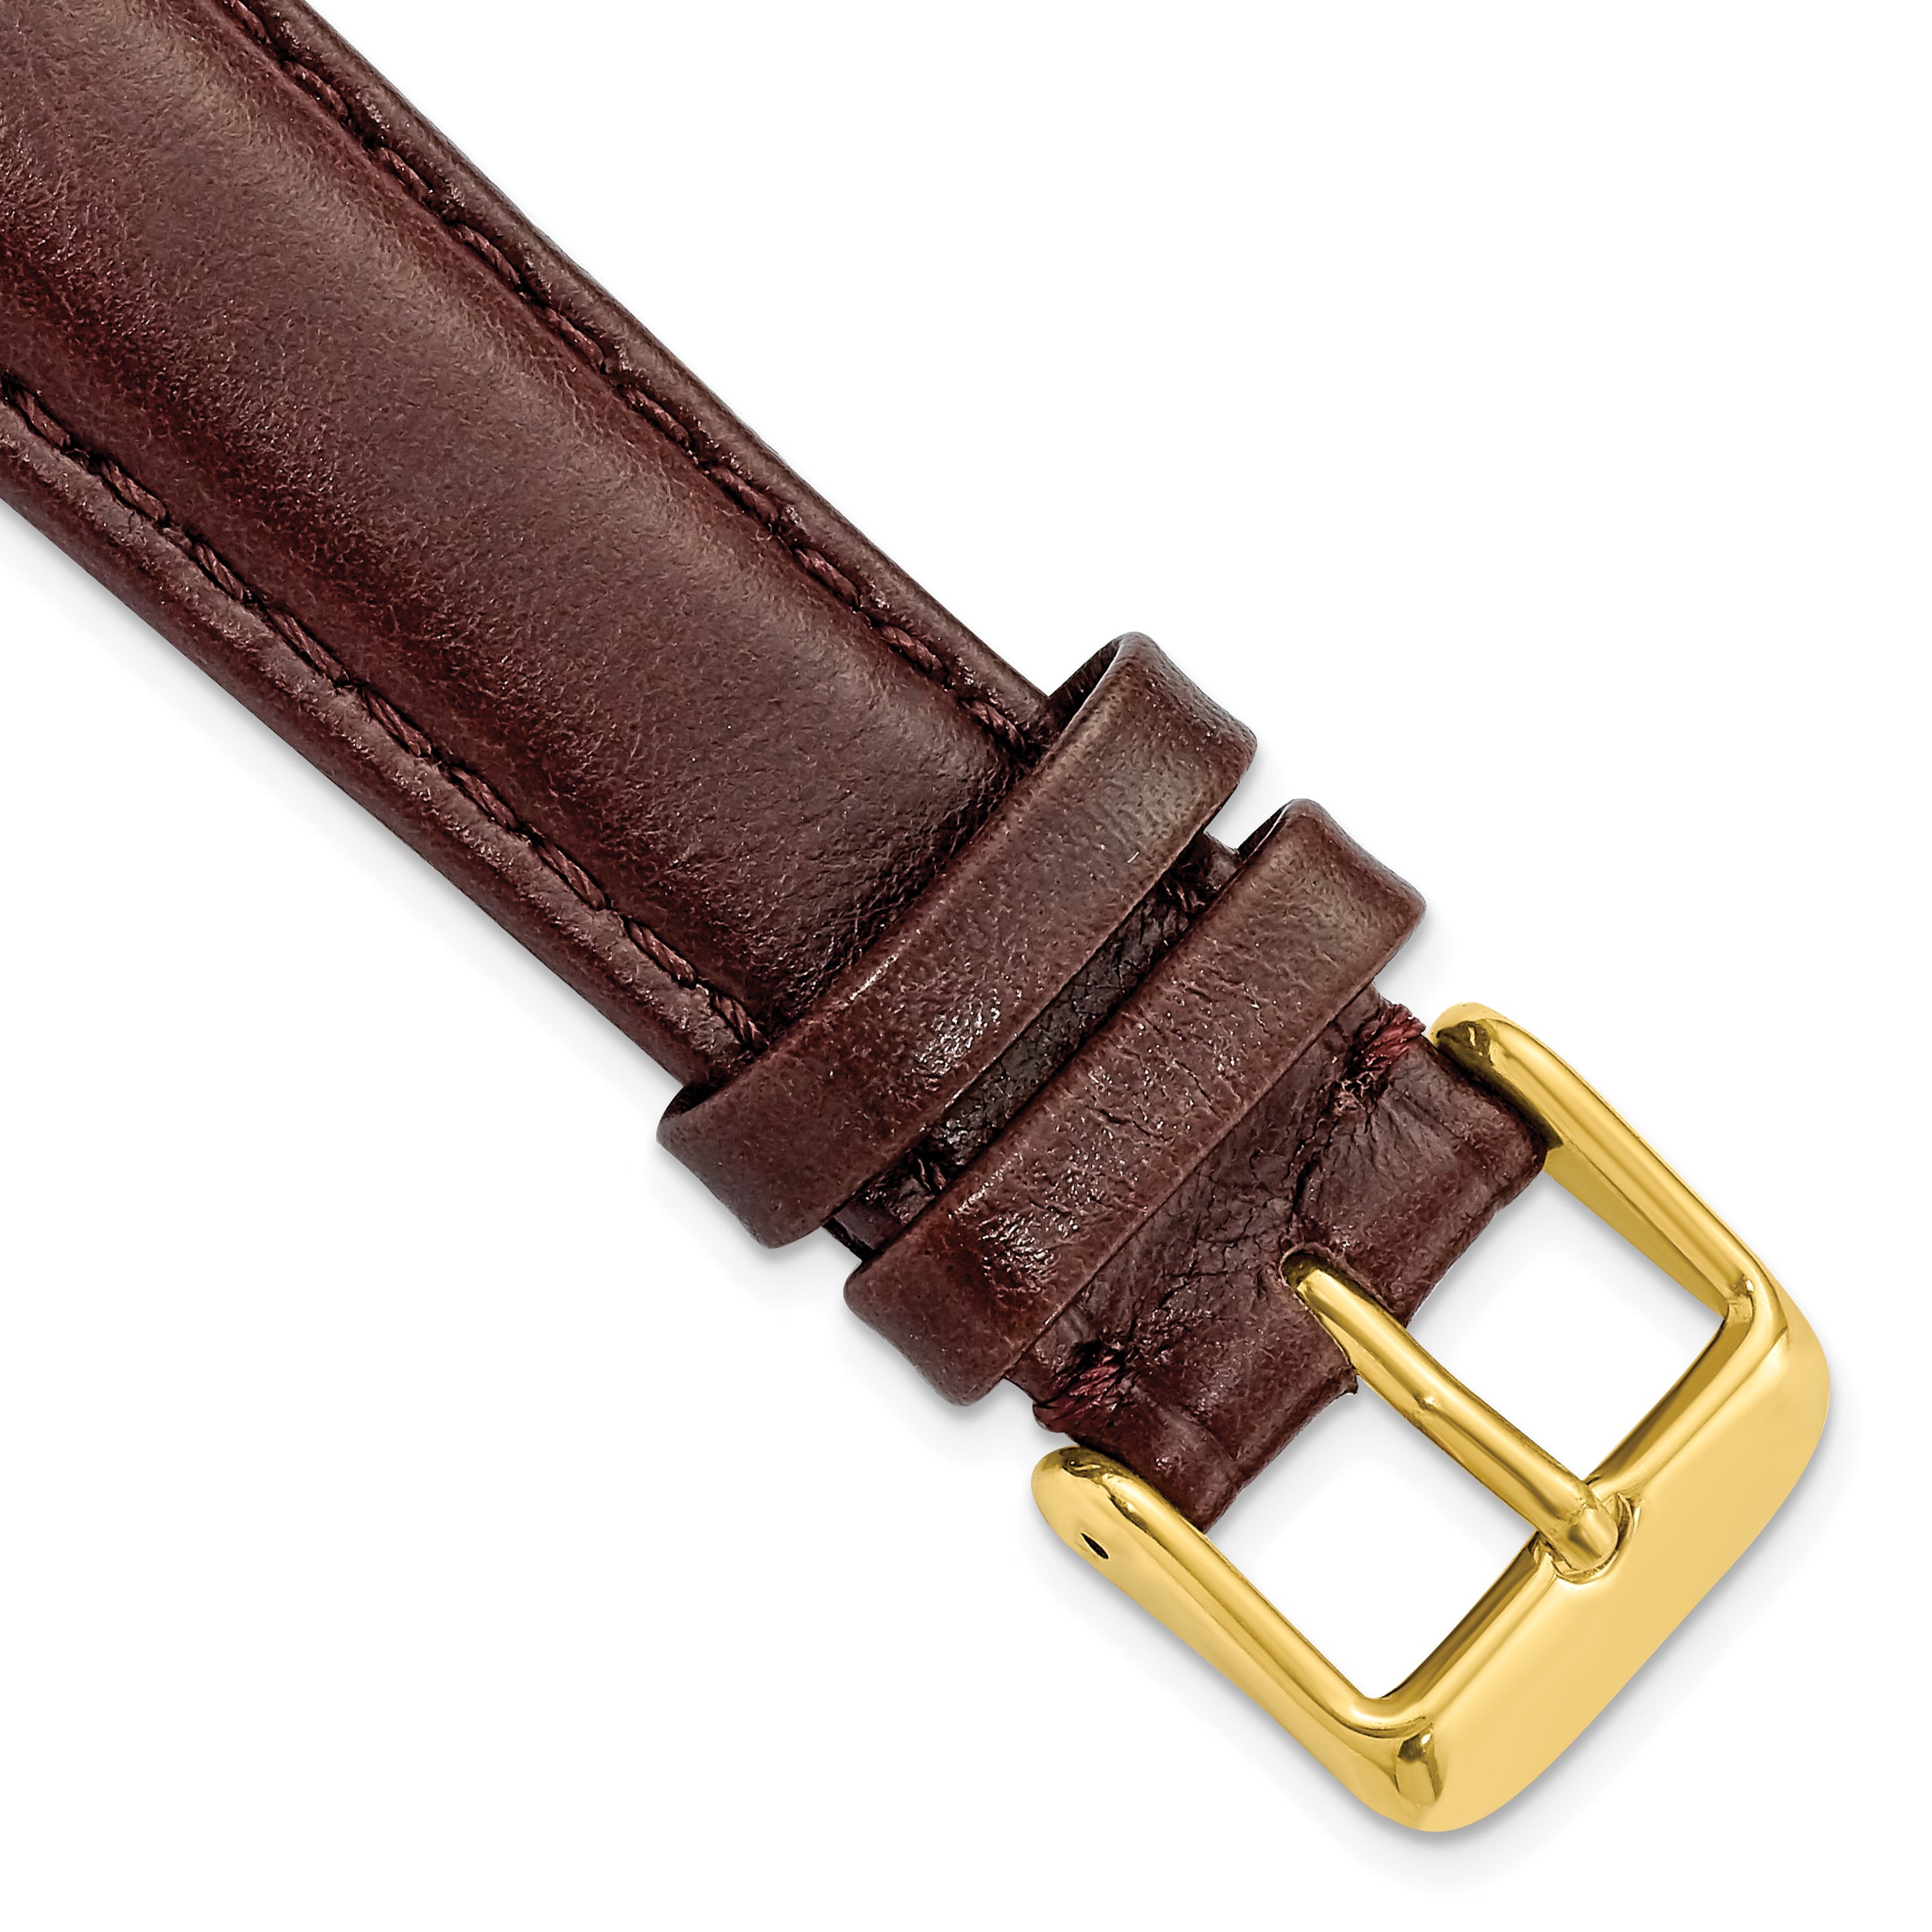 DeBeer 19mm Dark Brown Smooth Leather Chronograph with Gold-tone Buckle 7.5 inch Watch Band